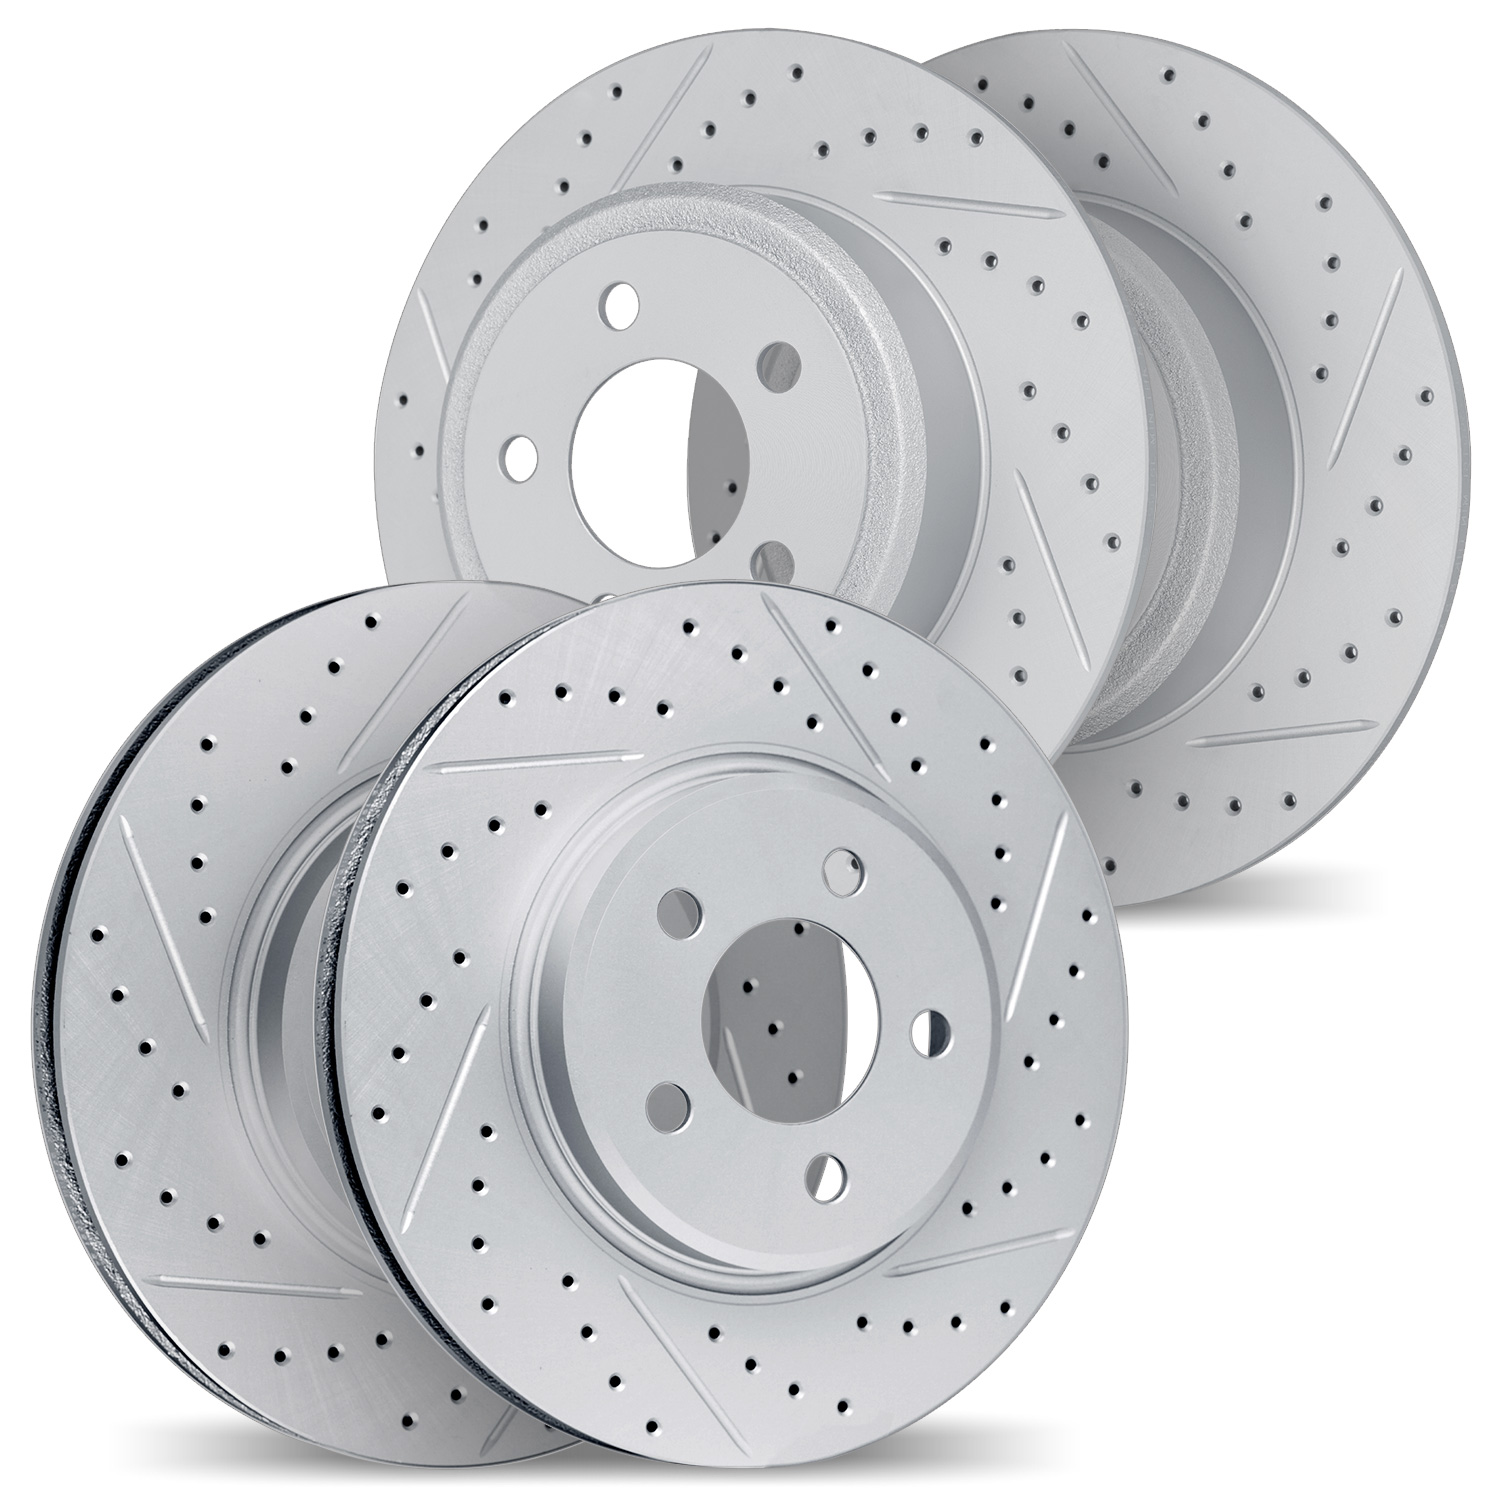 2004-40054 Geoperformance Drilled/Slotted Brake Rotors, 2002-2006 Multiple Makes/Models, Position: Front and Rear